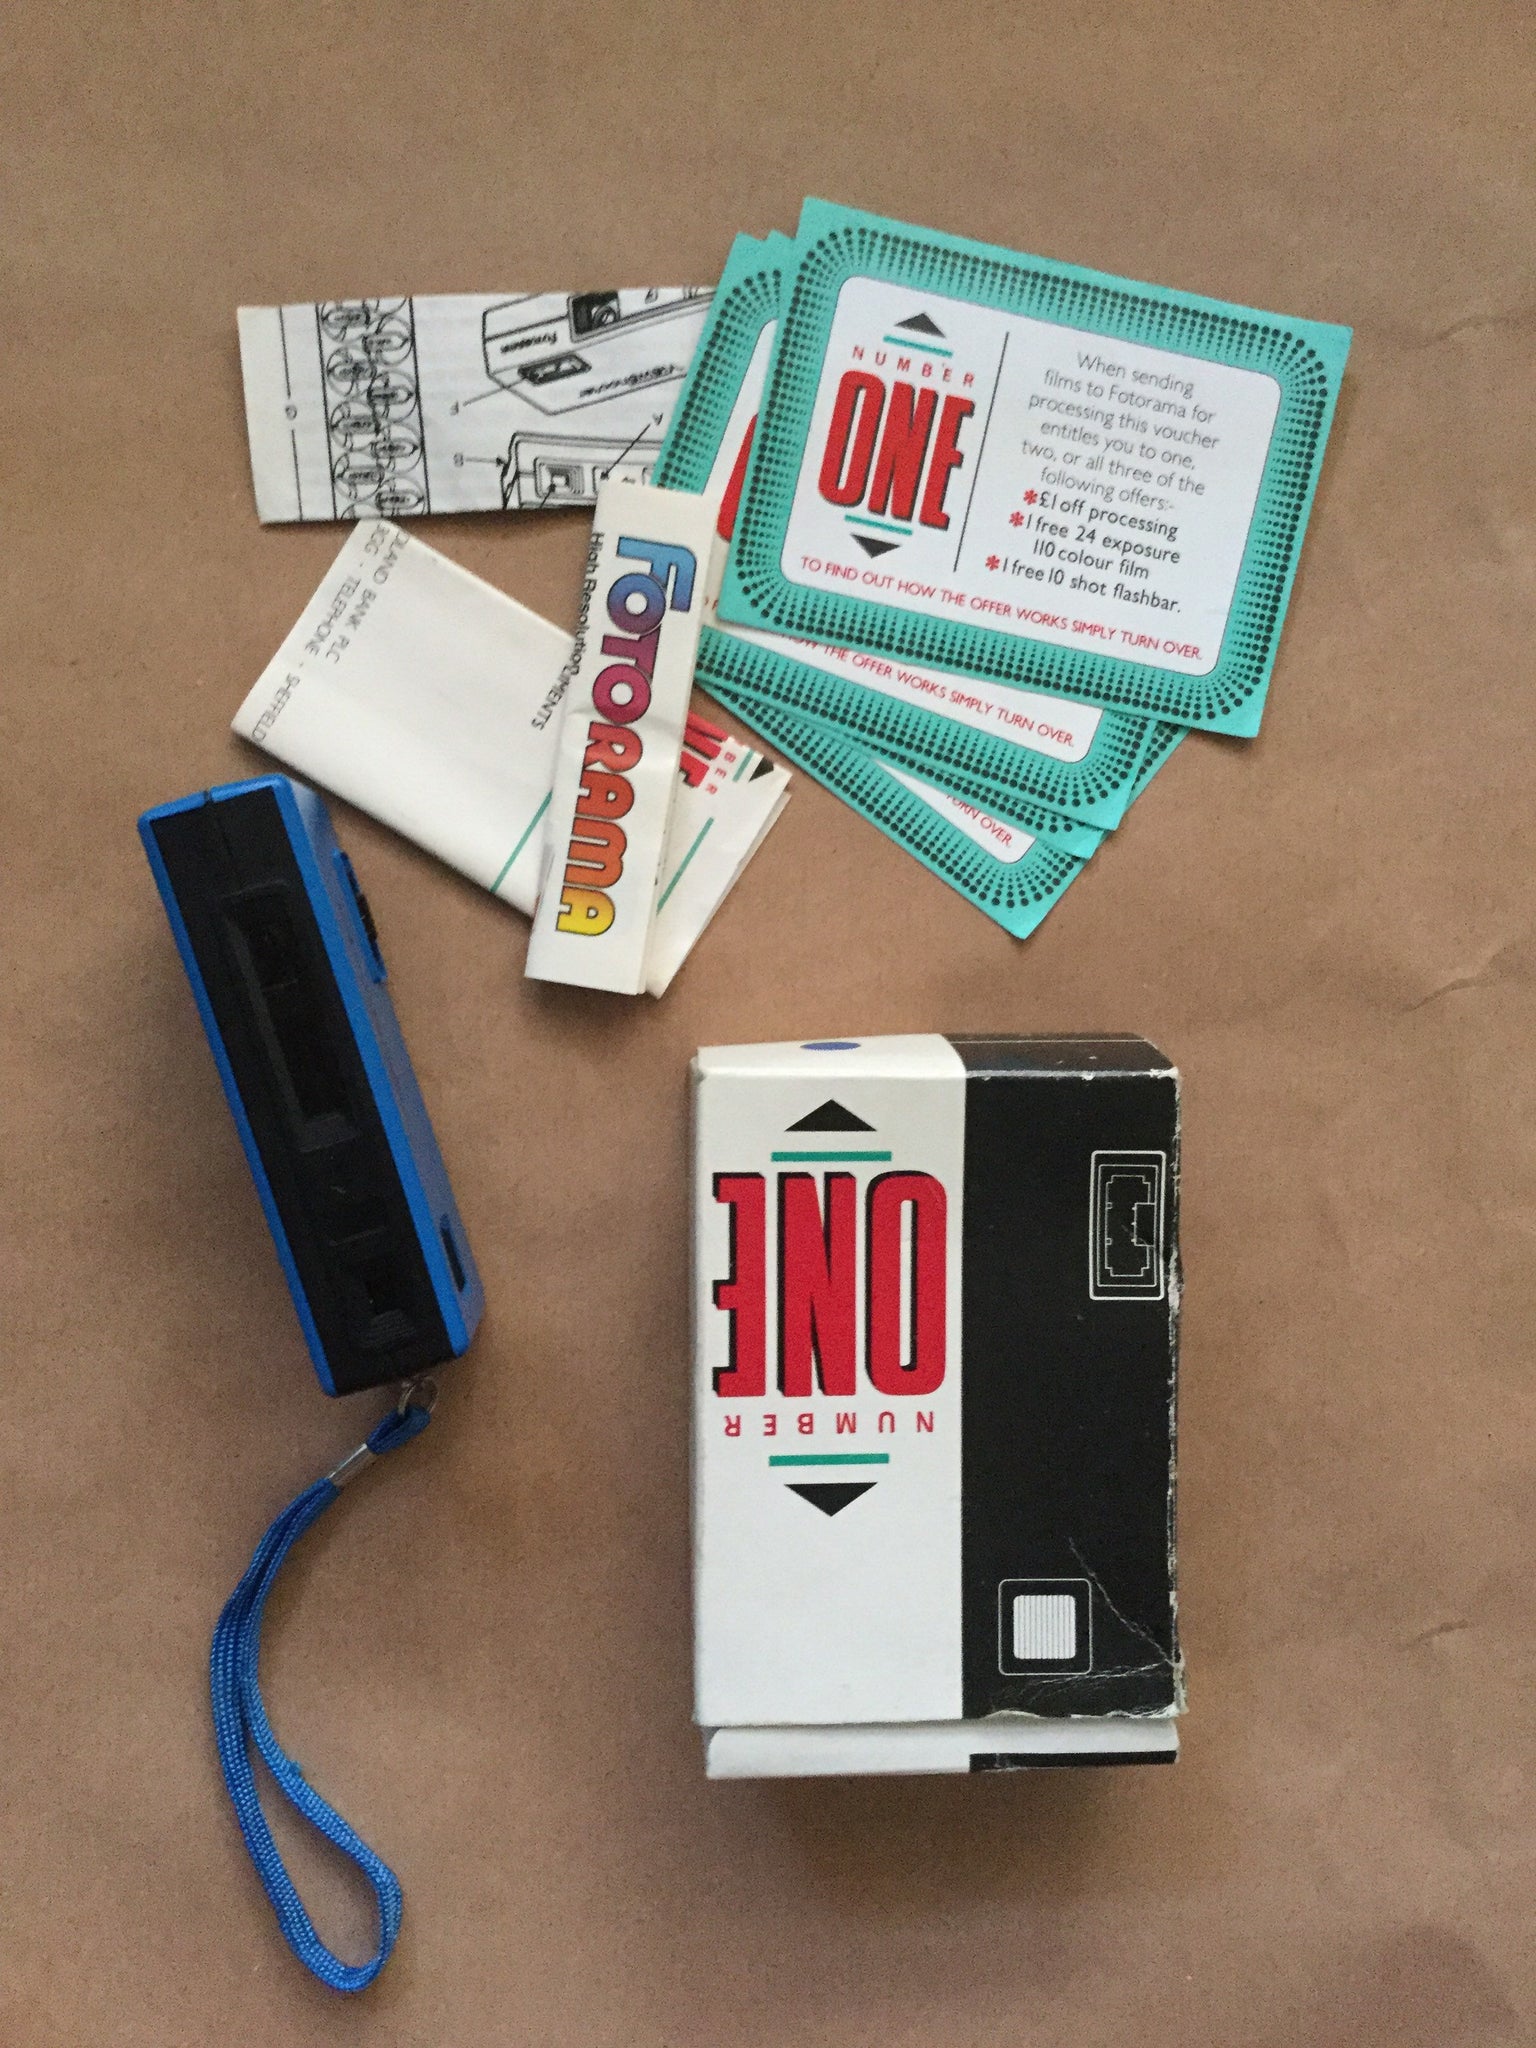 Number one 110 film camera, boxed with the original paperwork and vouchers (expired in 1989) this is a fun little camera and collectable. - RewindCameras quality vintage cameras, fully tested